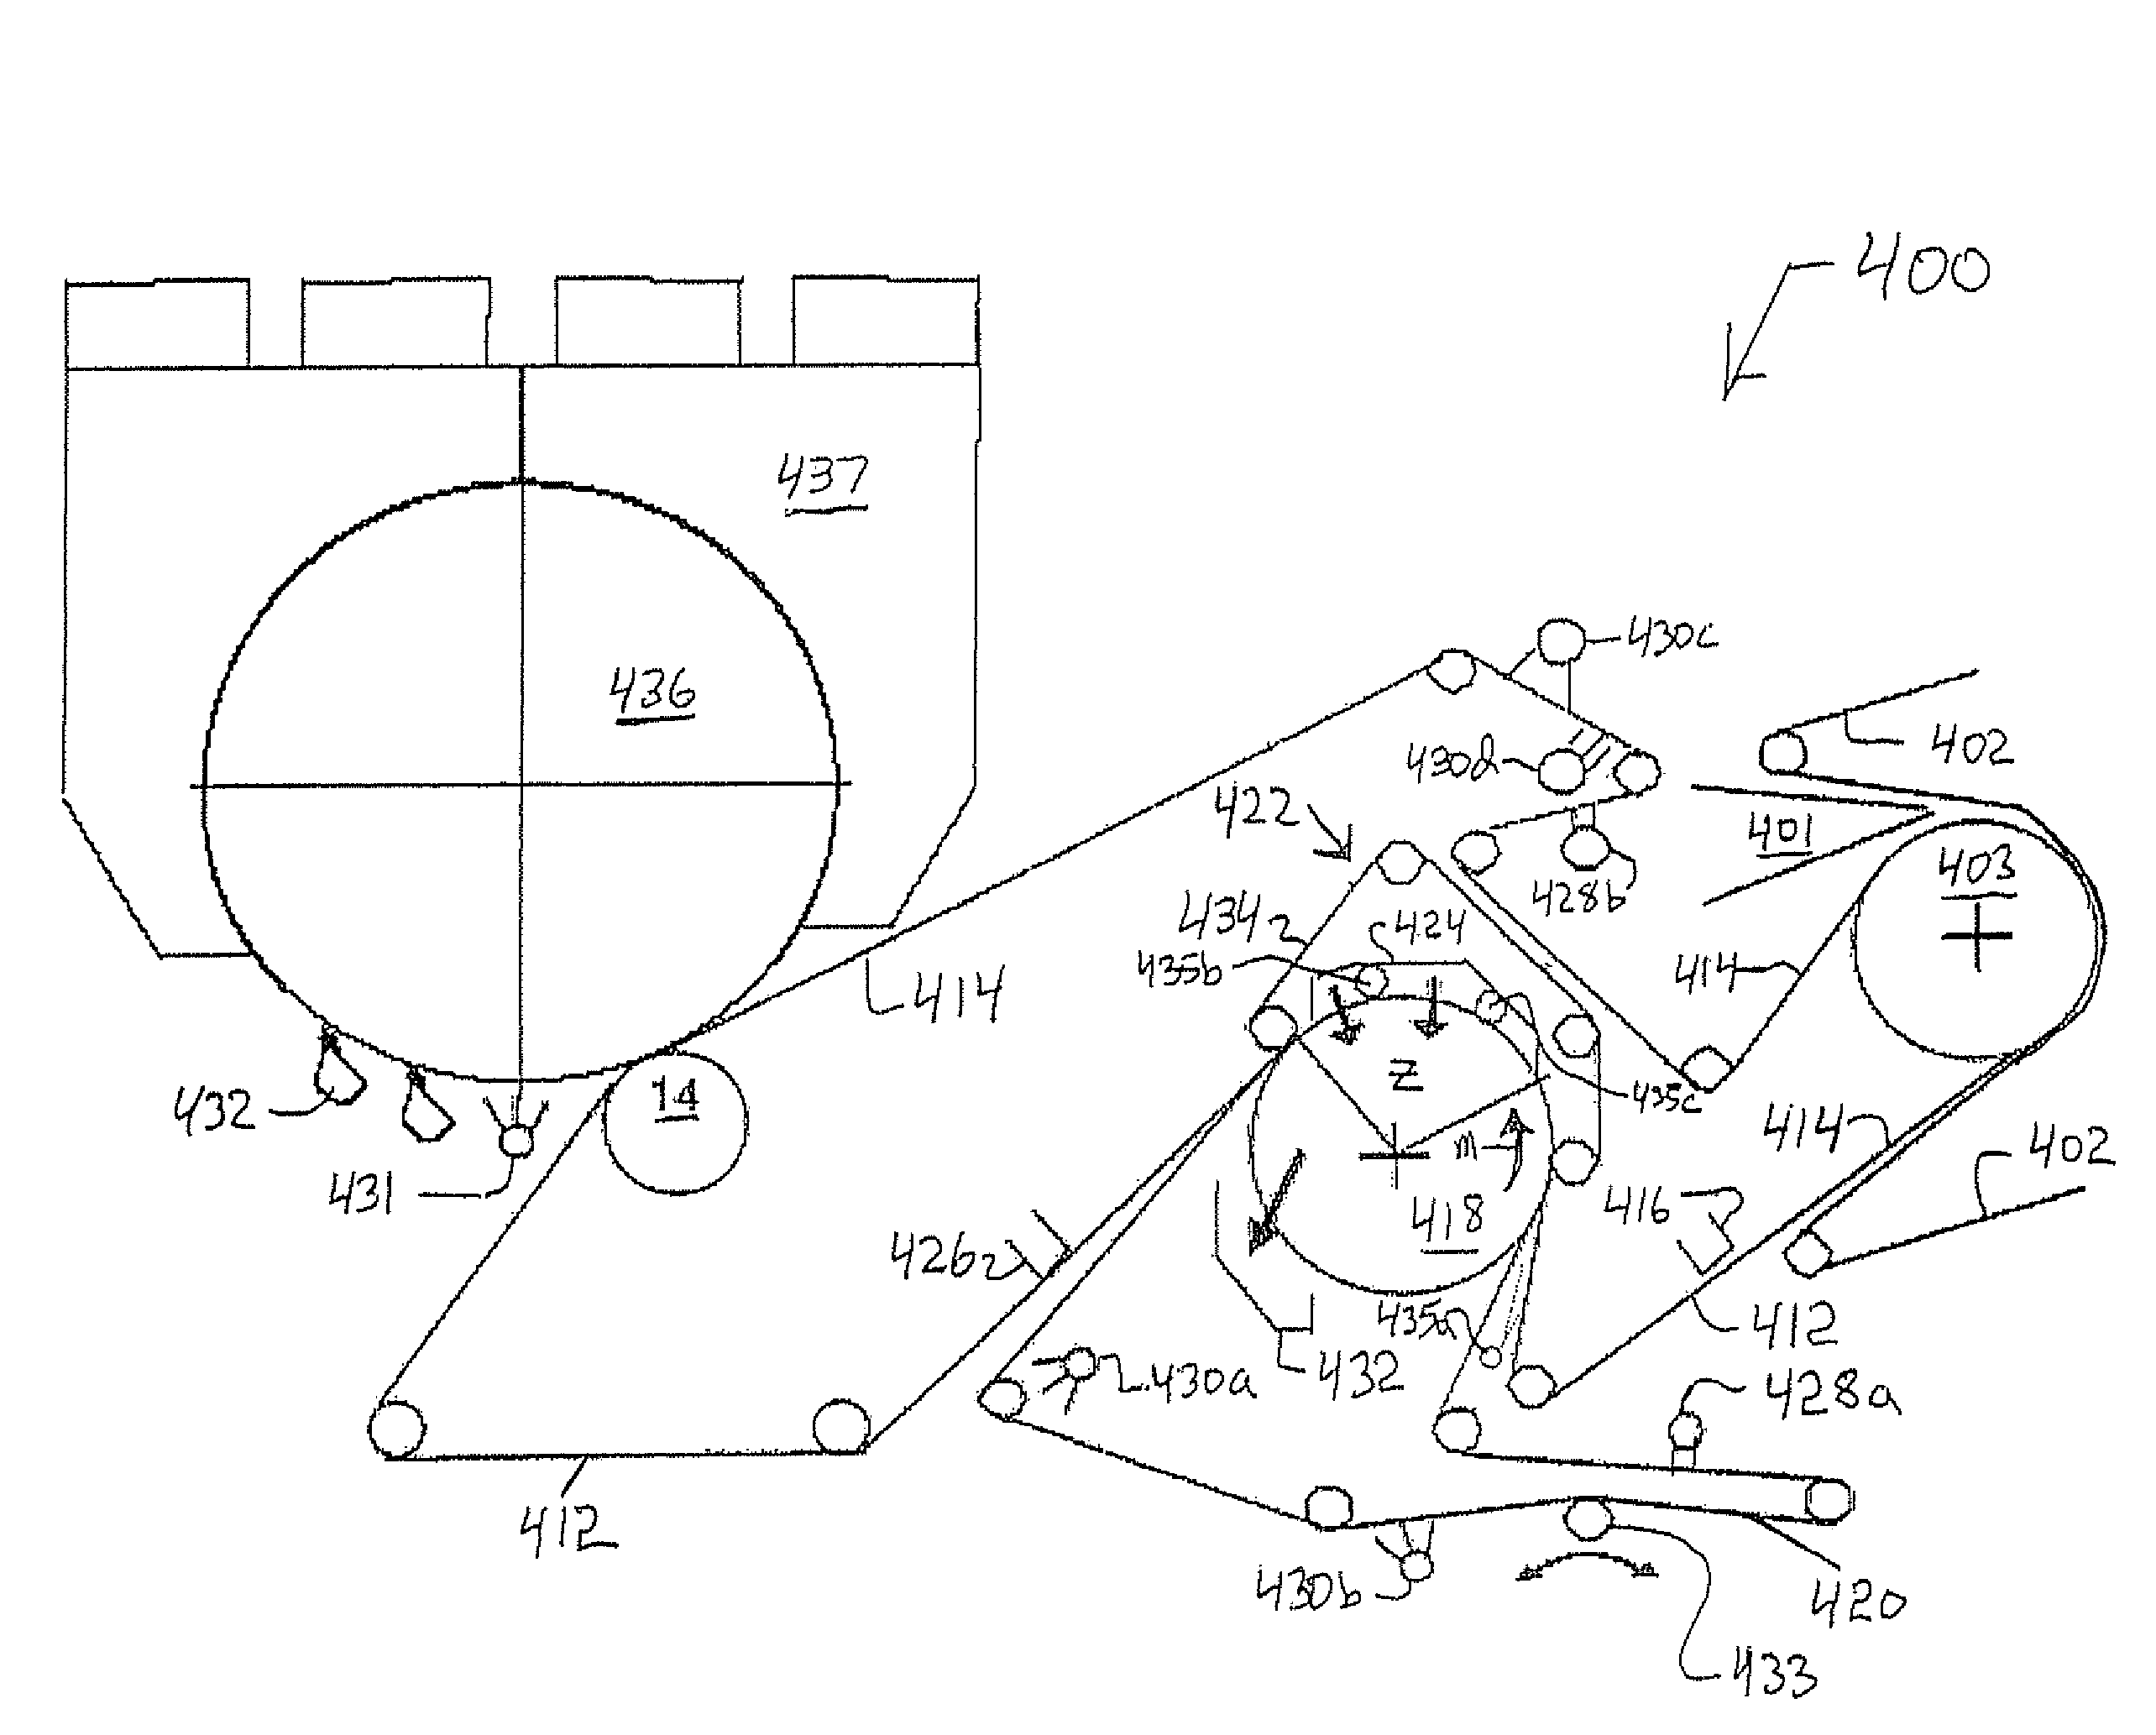 Forming fabric and/or tissue molding belt and/or molding belt for use on an ATMOS system